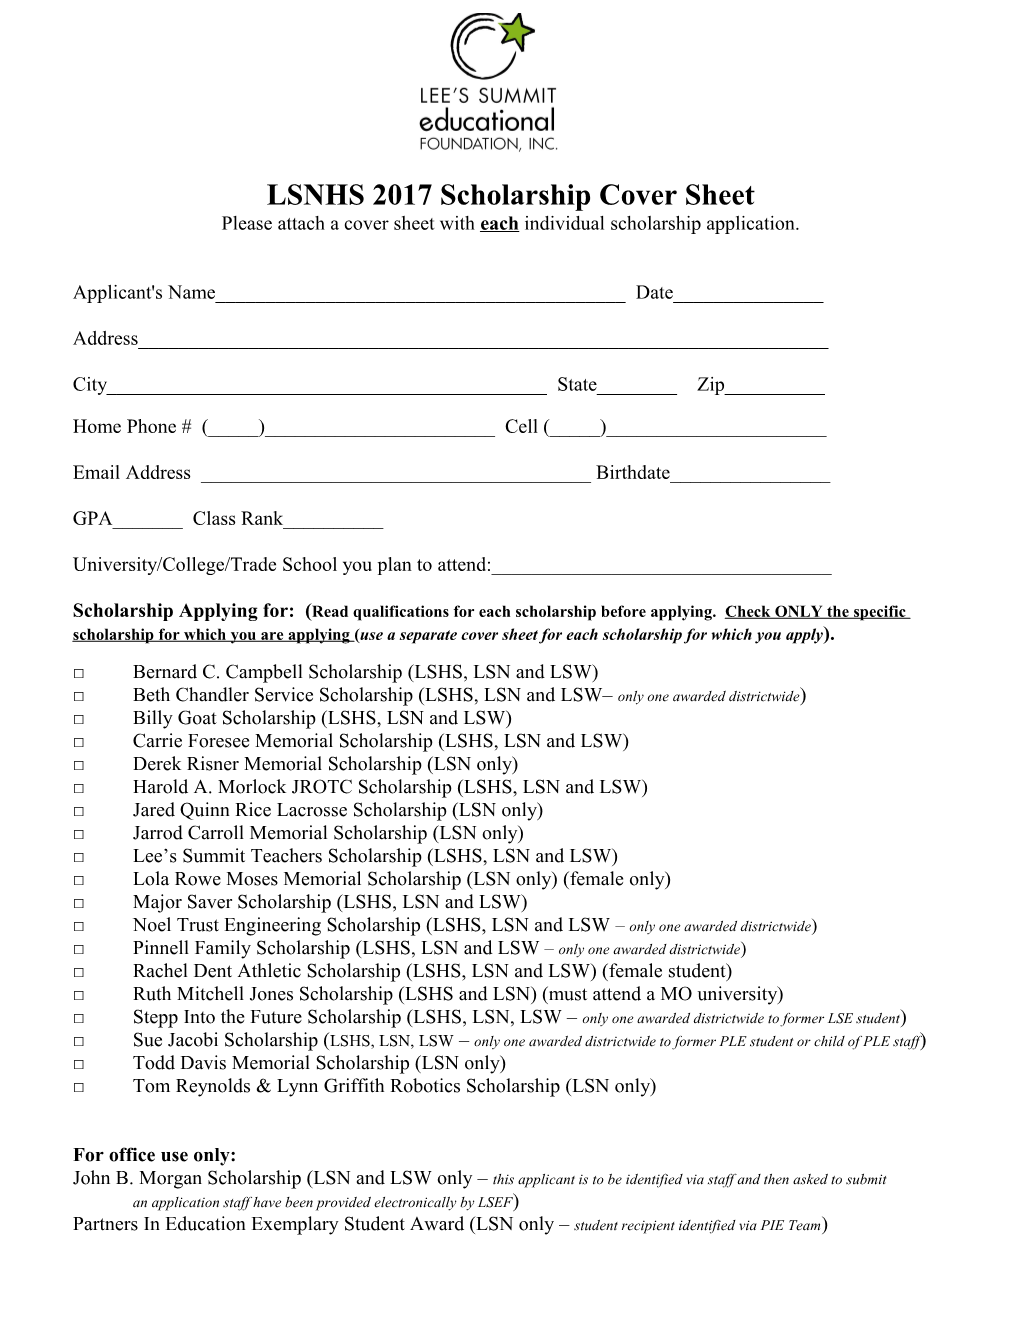 LSNHS 2017 Scholarship Cover Sheet